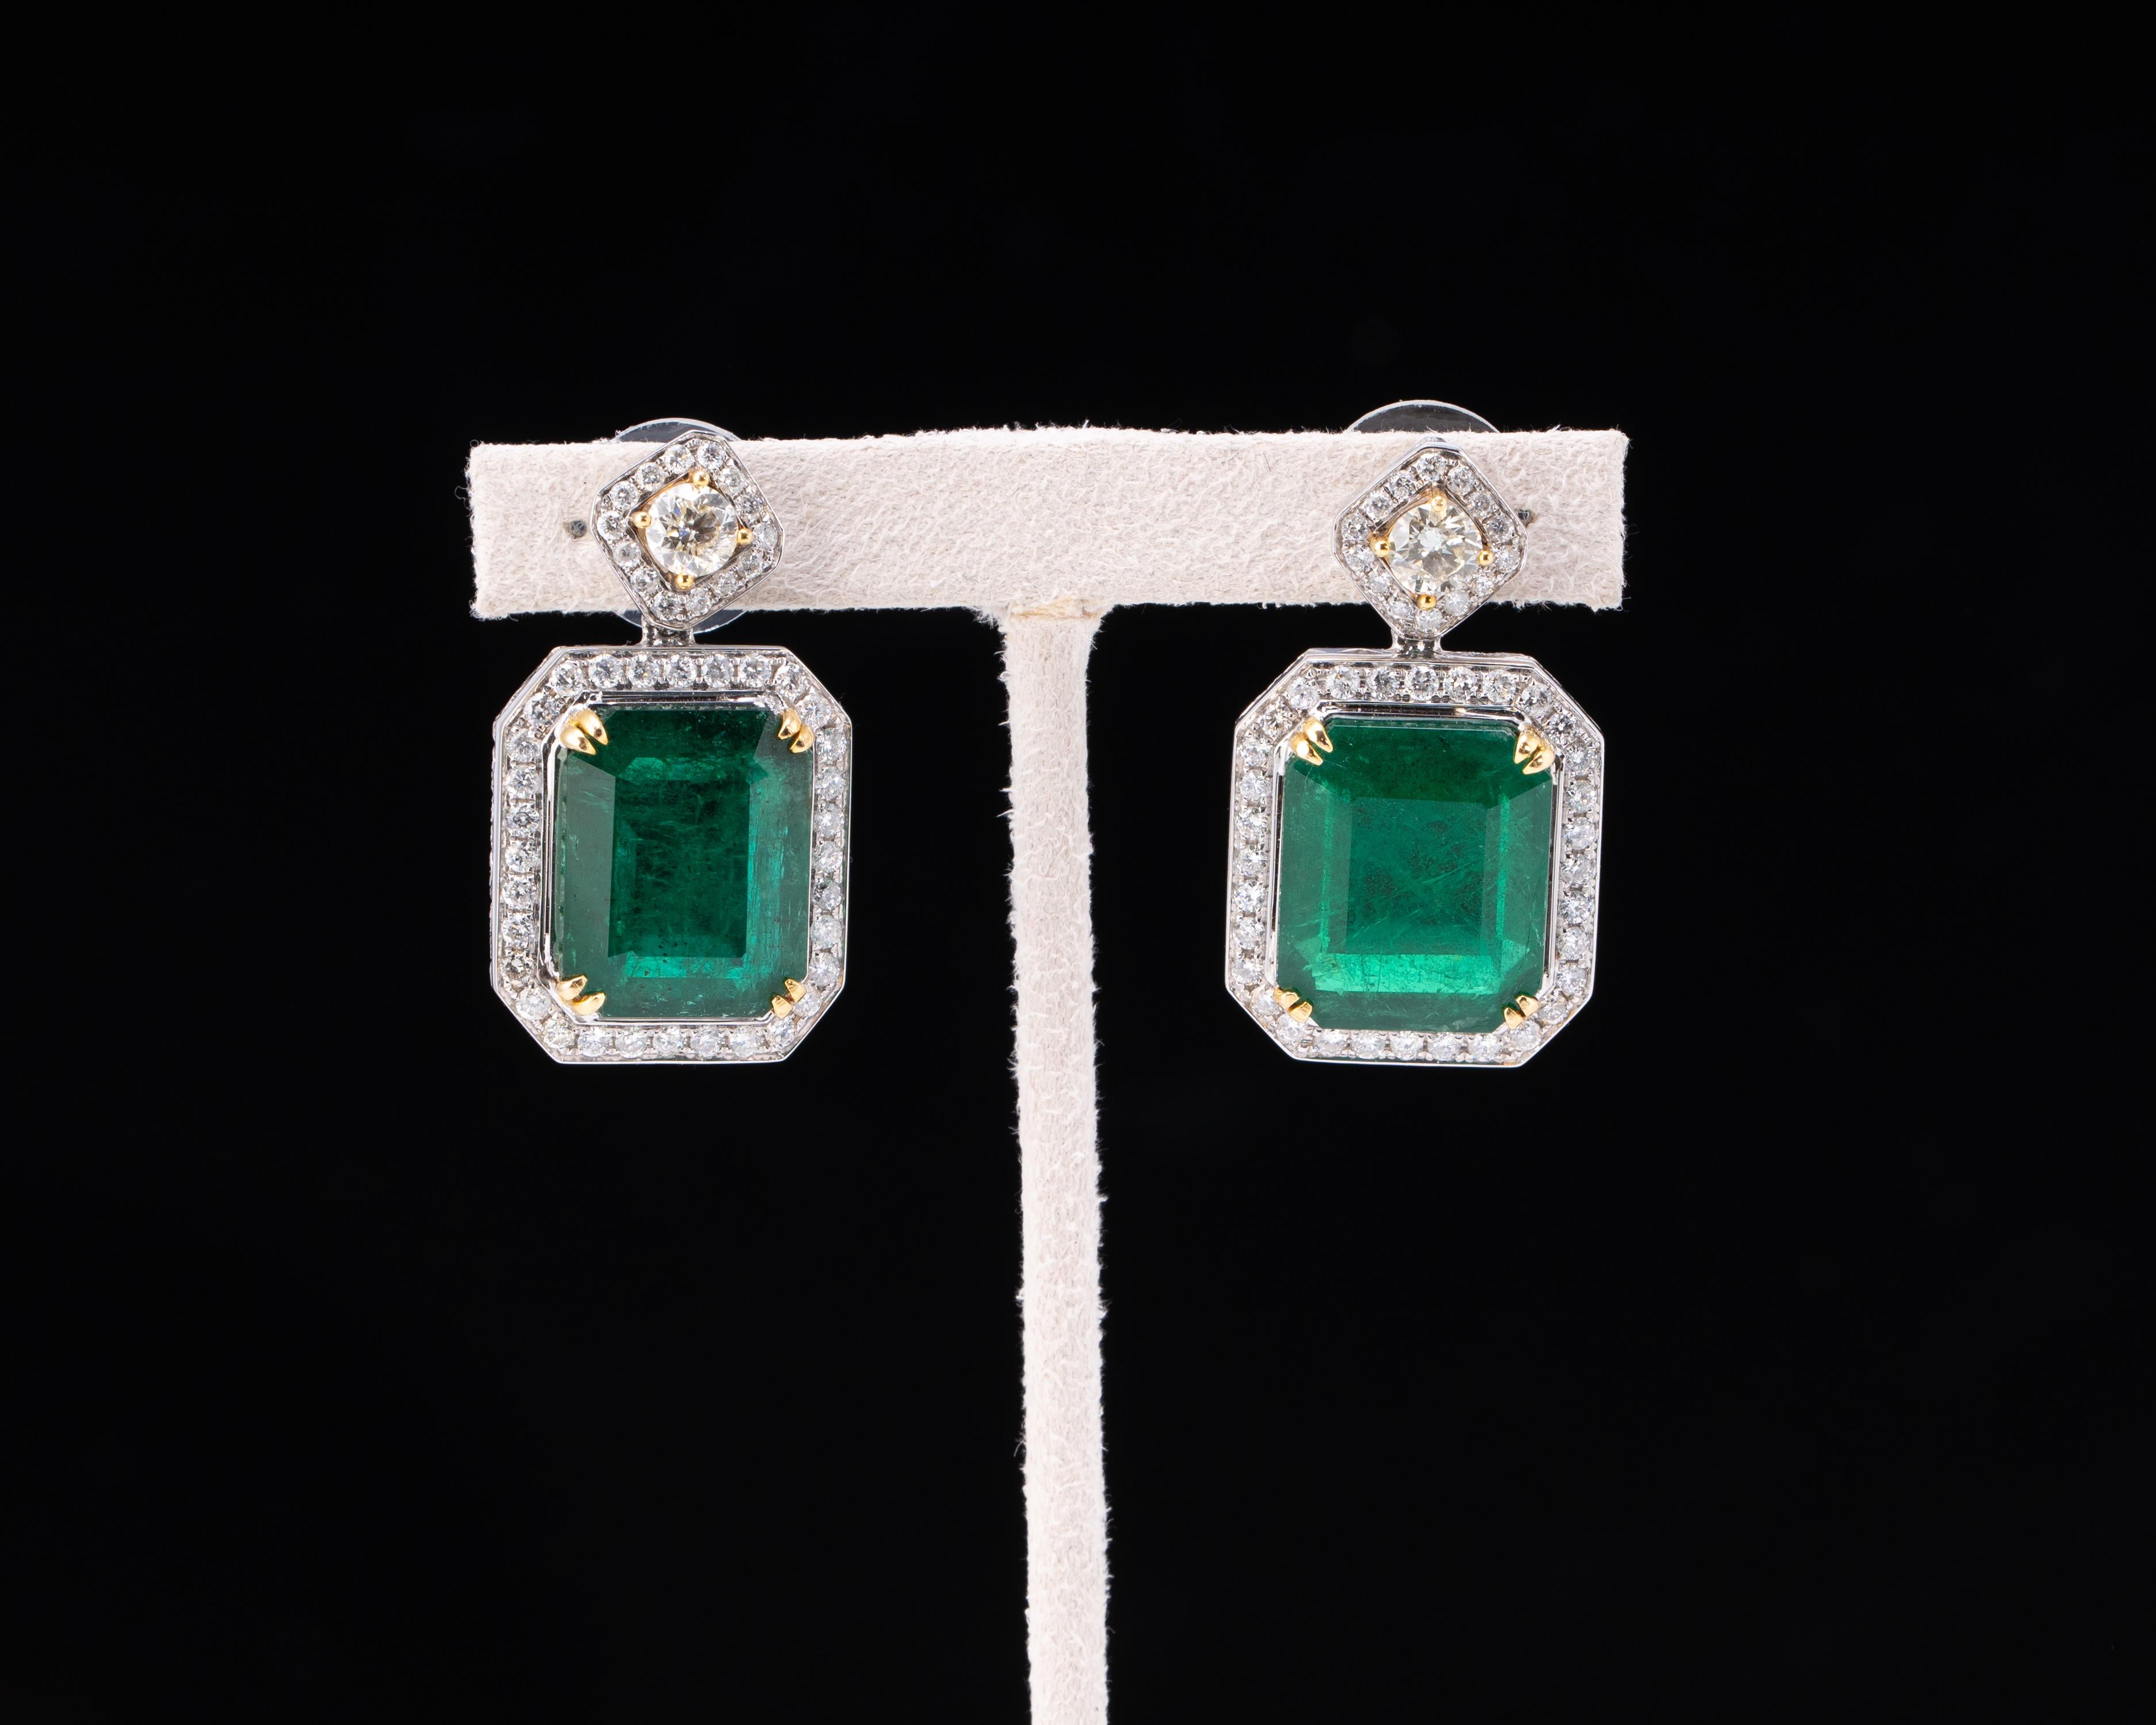 Earring :Em 2p/29.29cts Y Dia 2p/0.96ct  Dia 1.93ct 18k 13.61g

Make a statement with this pair of 29.29 carat Emerald Cut, Zambian Emerald earrings, transparent with few natural inclusions. These are a classic piece, The emeralds are absolutely